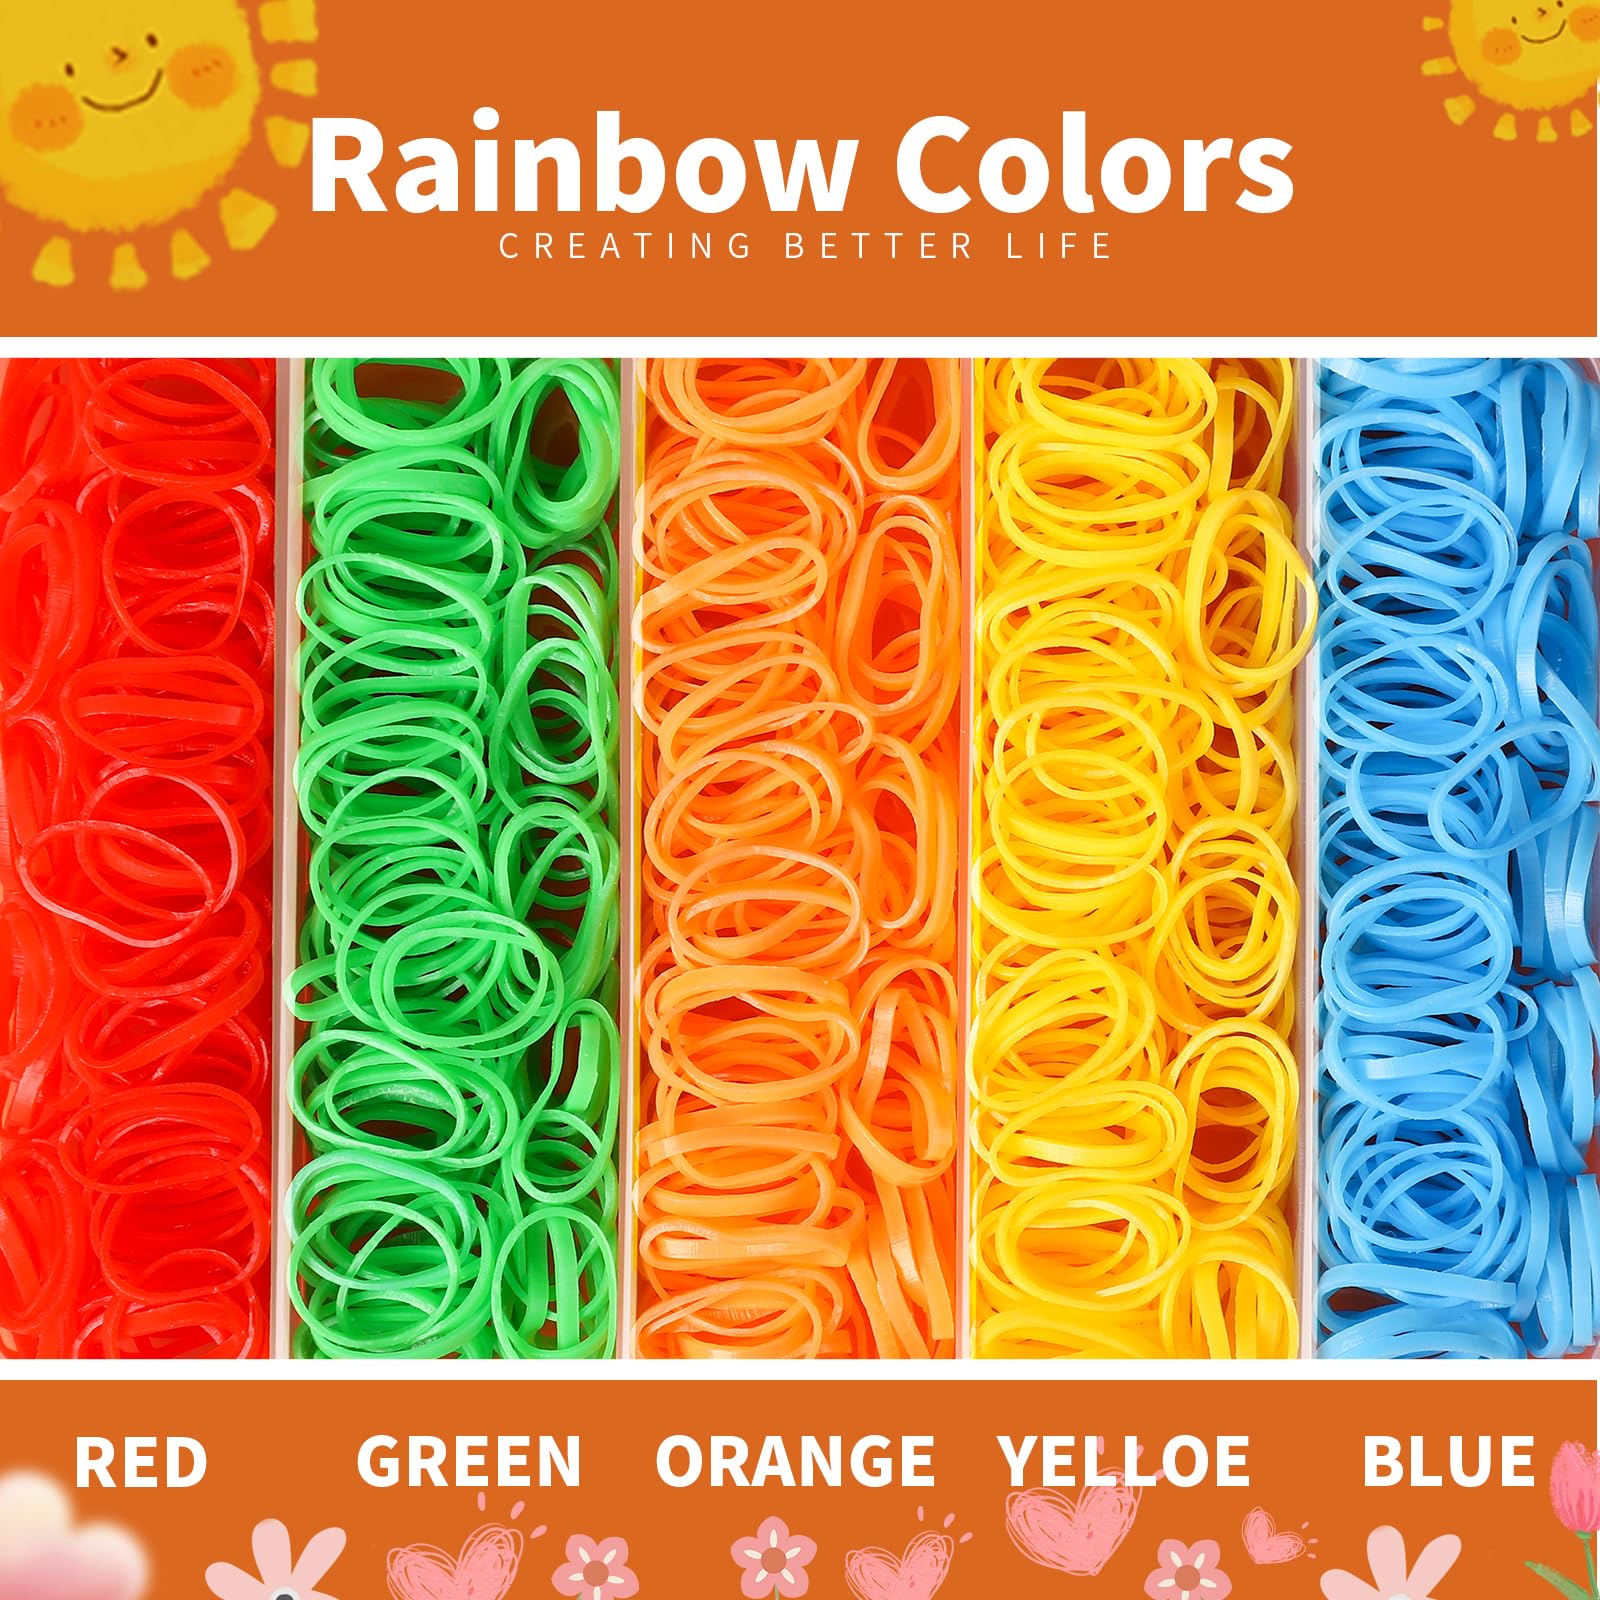 Elastic Hair Bands, YGDZ 5 Colors 600 PCS Mini Rubber Bands for Hair with Organizer Box, Hair Accessories for Toddler, Girl, Baby, Rainbow Color